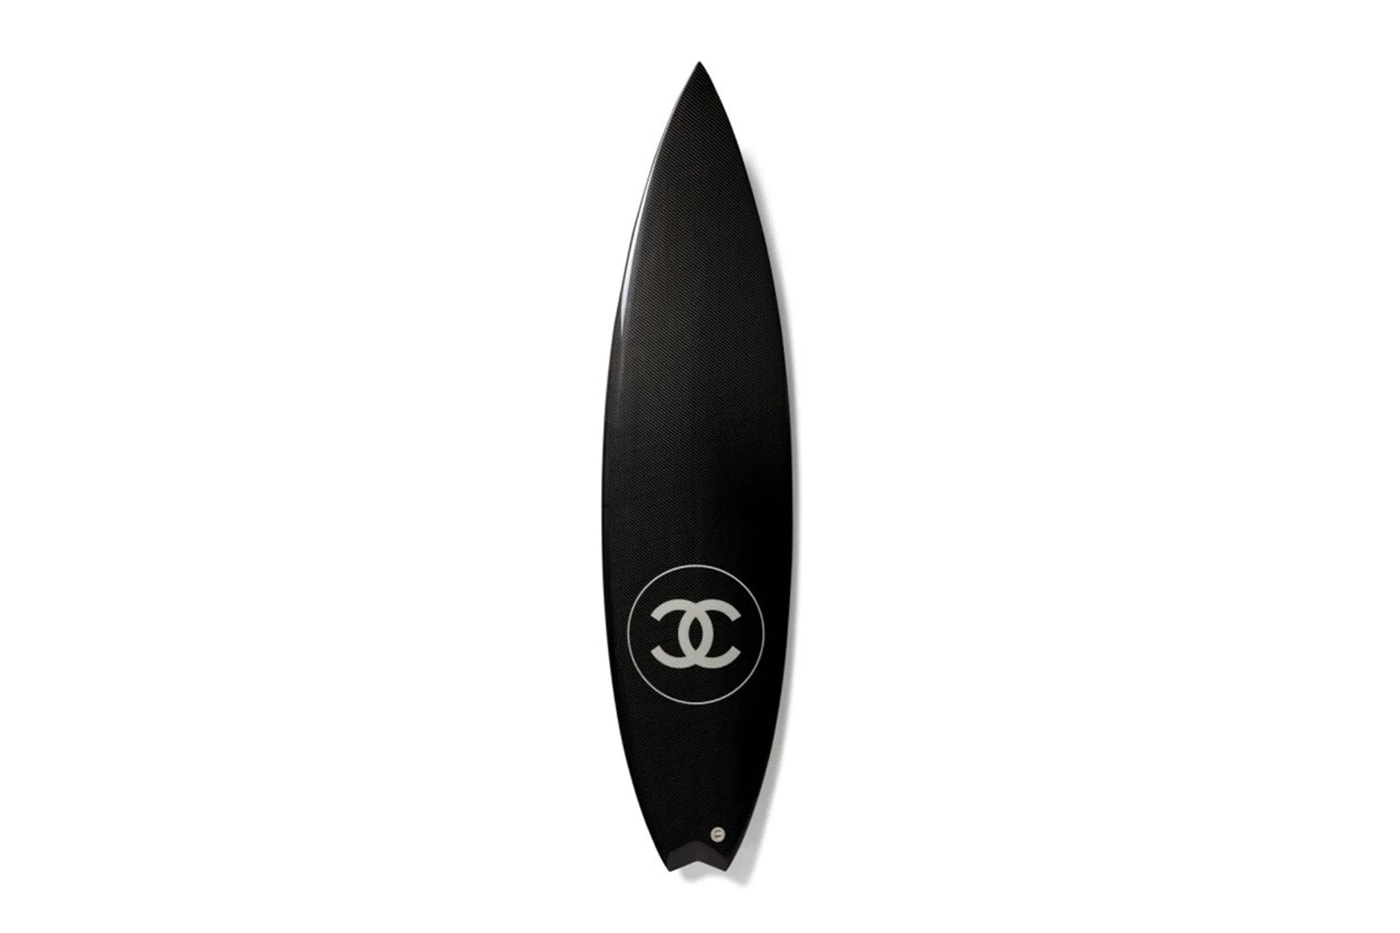 Chanel Surfboard and Basketball Holder Release Information Justin reed accessories Philippe Barland